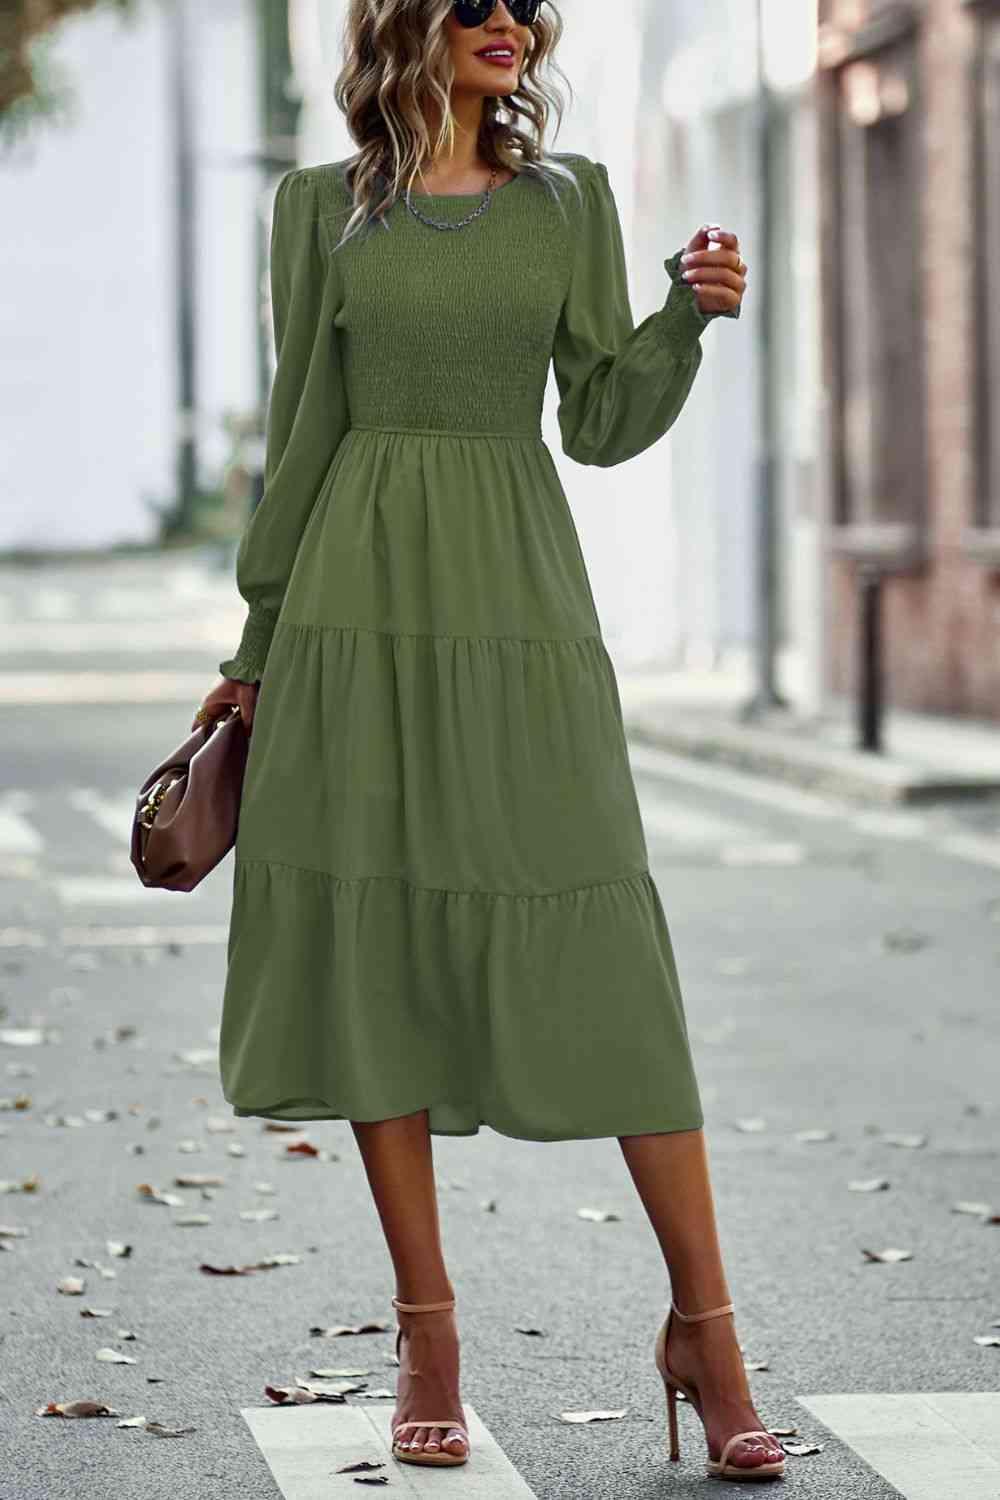 a woman in a green dress is standing on the street